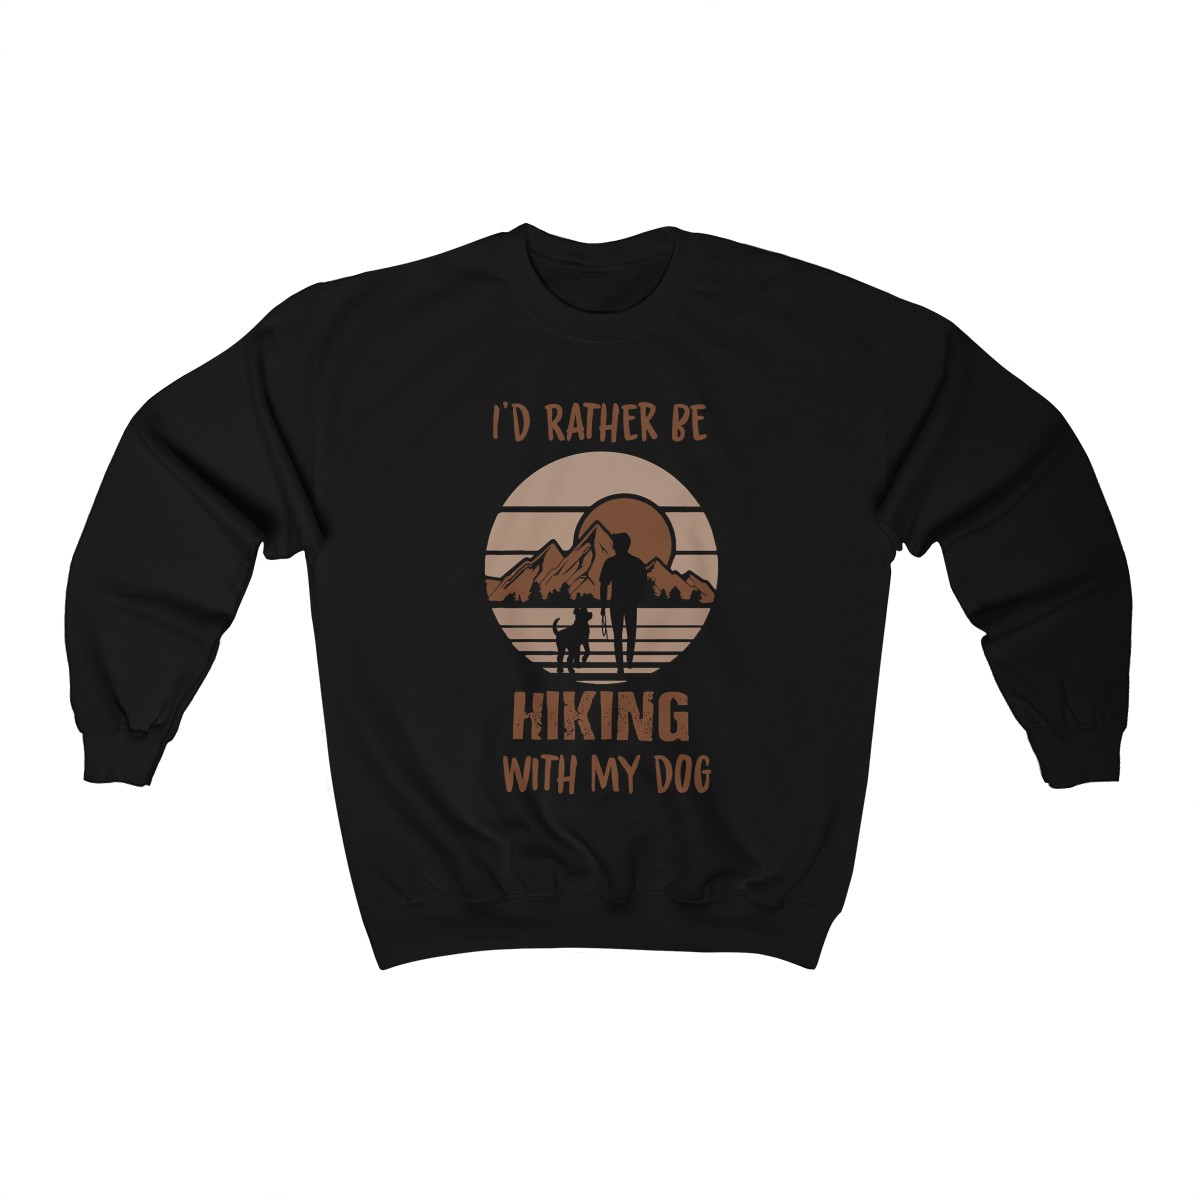 I'd Rather Be Hiking With My Dog, Pets Lover Unisex T-Shirt, Sweatshirt, Hoodie